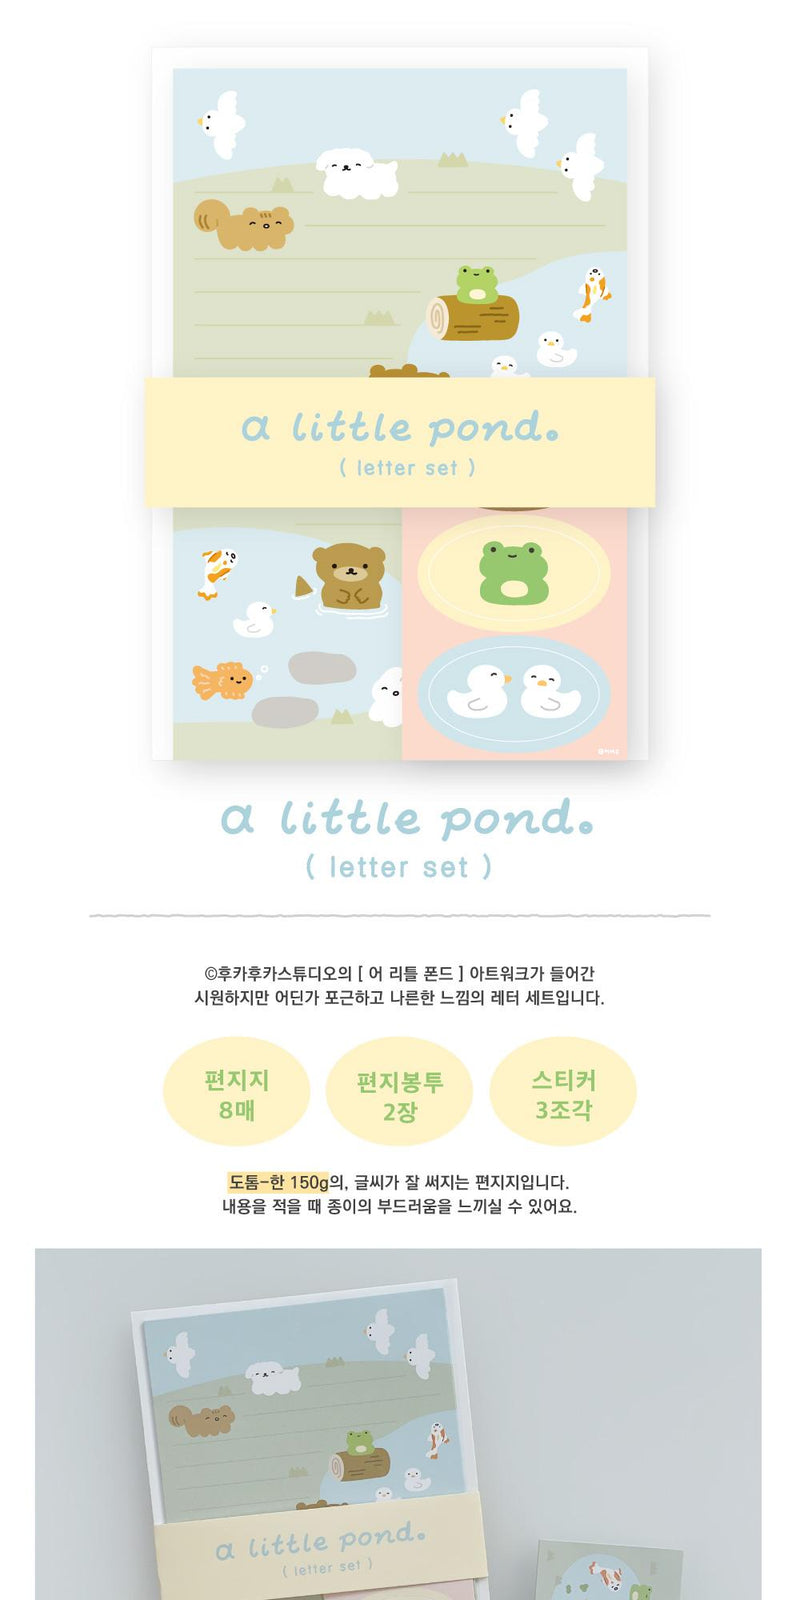 A Little Pond。 レターセット